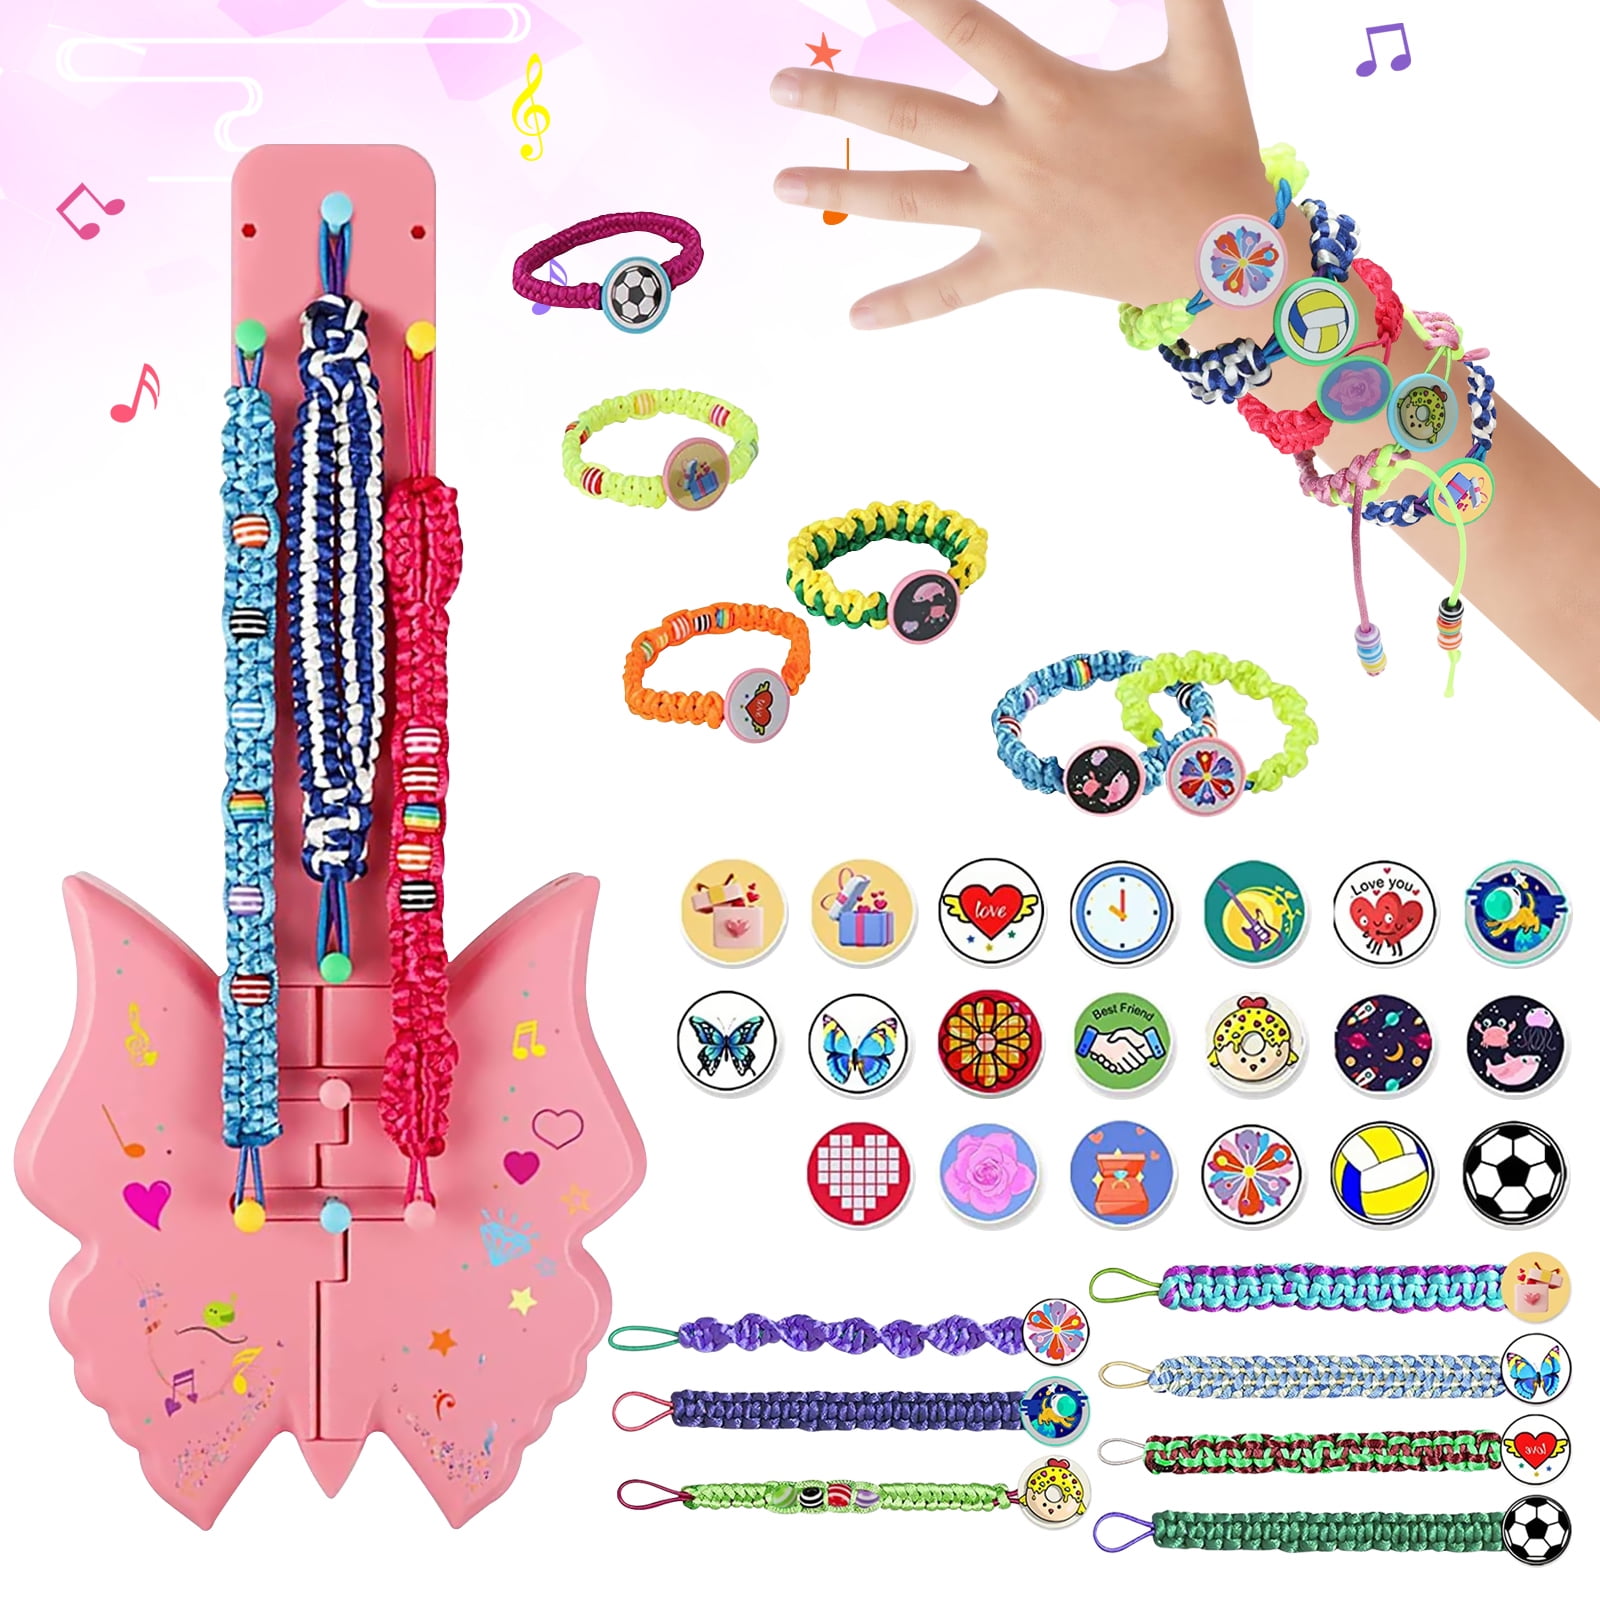  Arts and Crafts for Kids Ages 8-12,Friendship Bracelet Making  Kit for Girl,Kids Jewelry Making Kit with 28 Pre-Cut Threads,Christmas  Birthday Gifts for Ages 6 7 8 9 10 11 12 Year